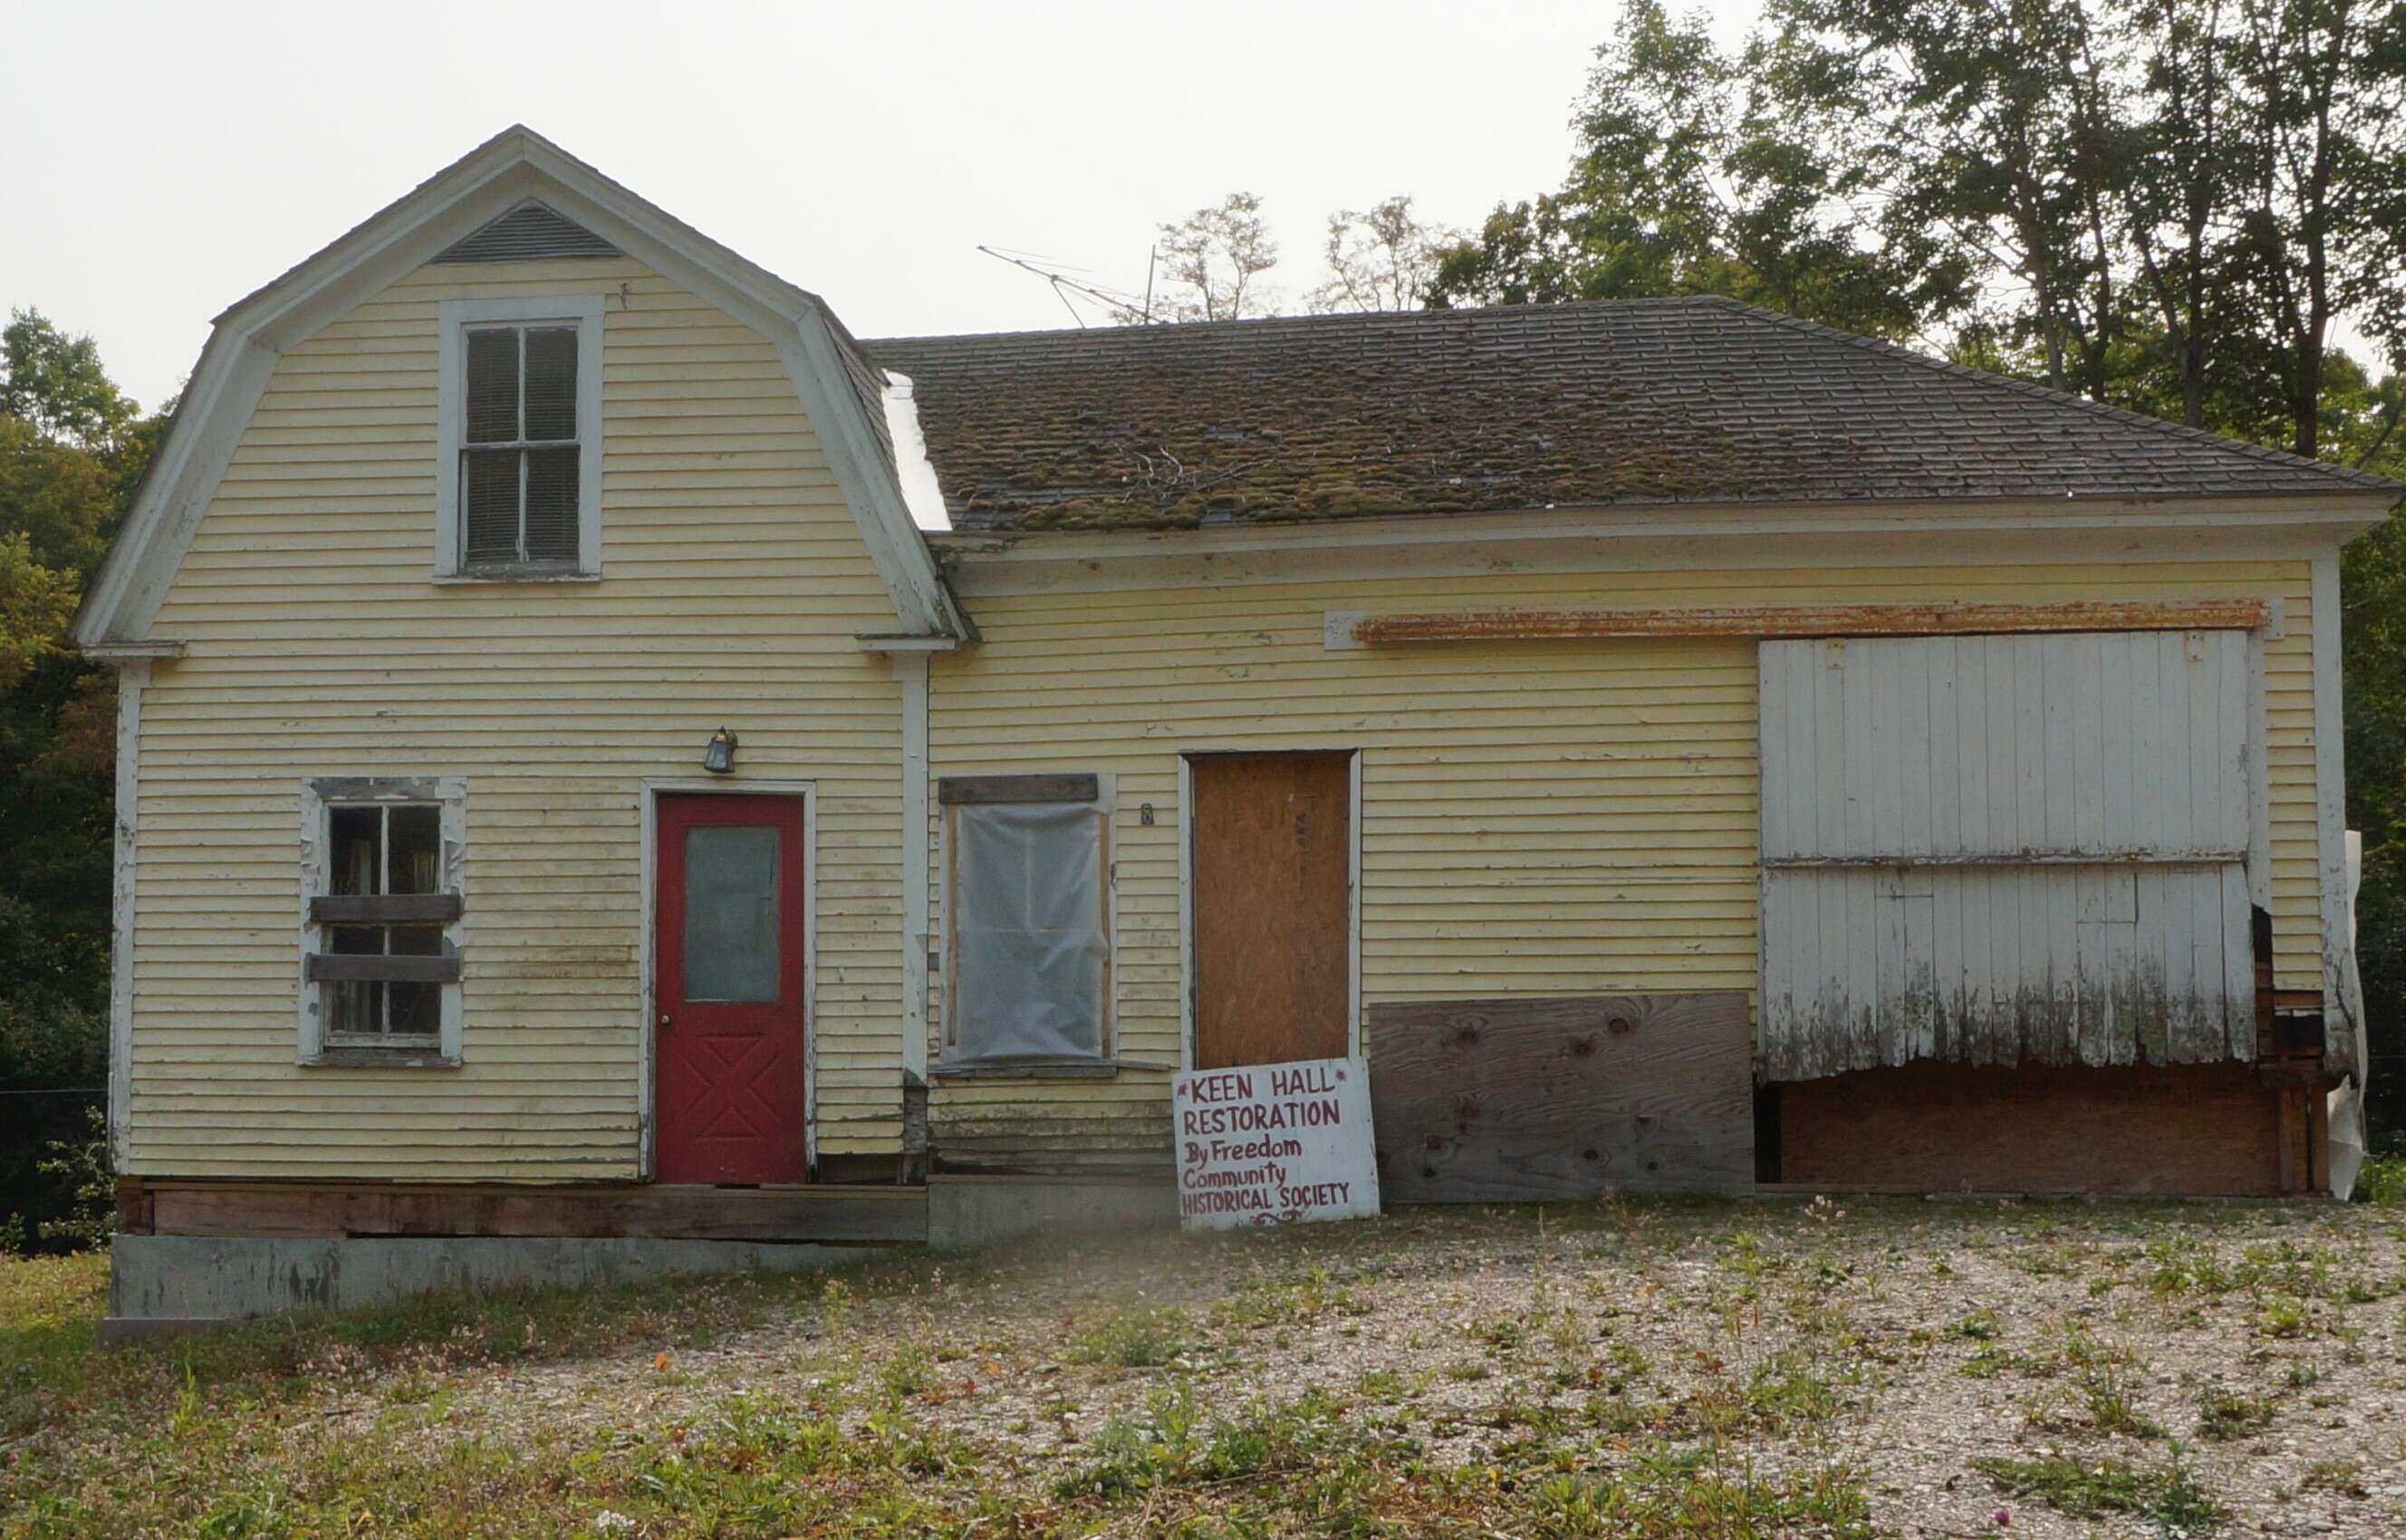 A rear view of an old house with peeling yellow paint and a hand-made sign leaning against it that says Keen Hall Freedom Community Historical Society